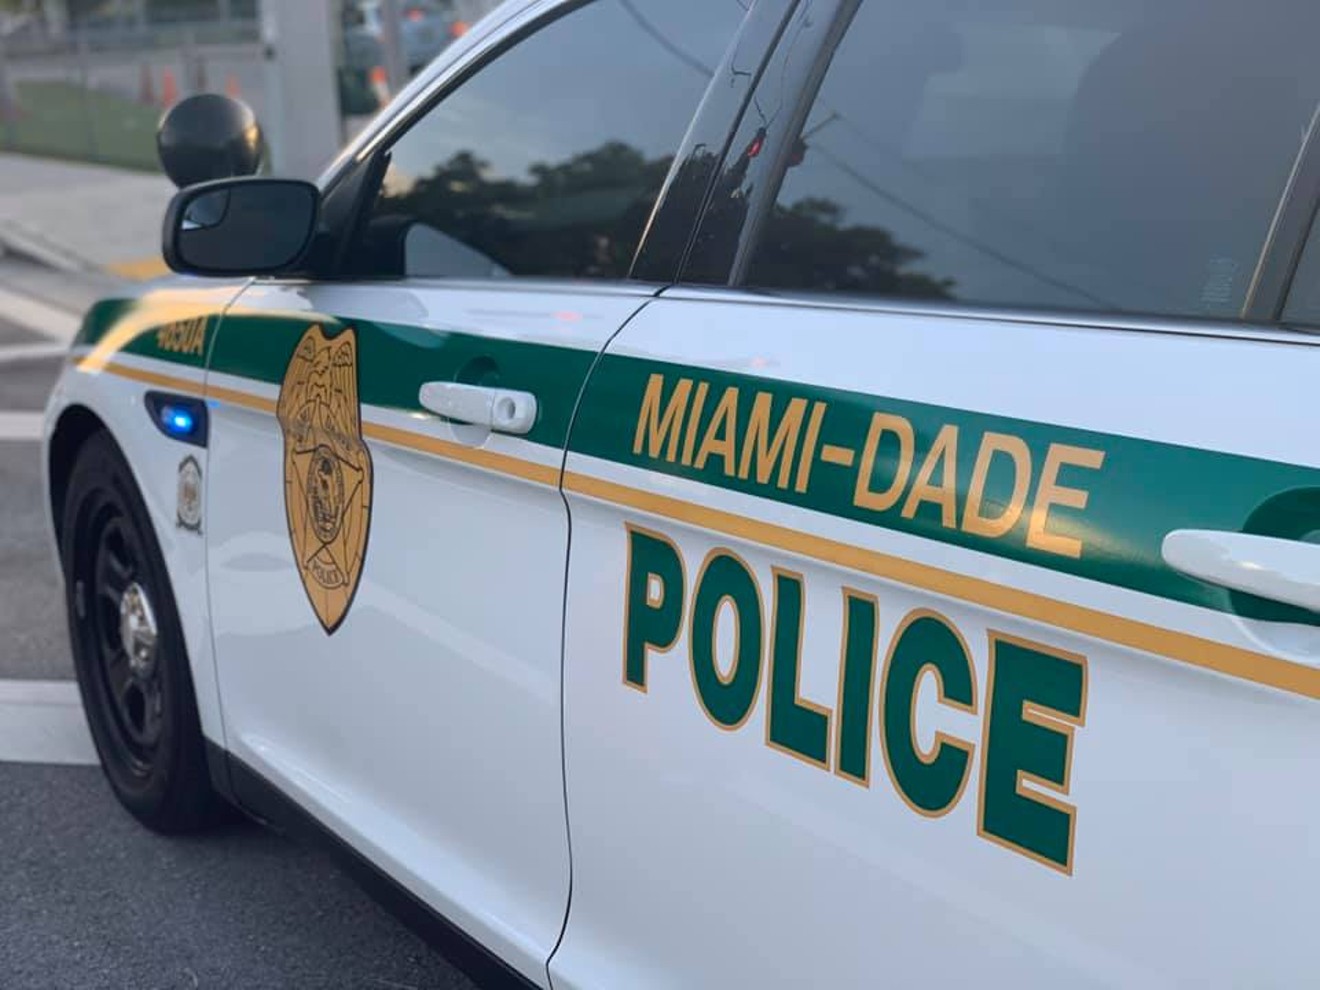 A voluntary survey from the Miami-Dade Police Department found that about half of its employees have been vaccinated against COVID-19.